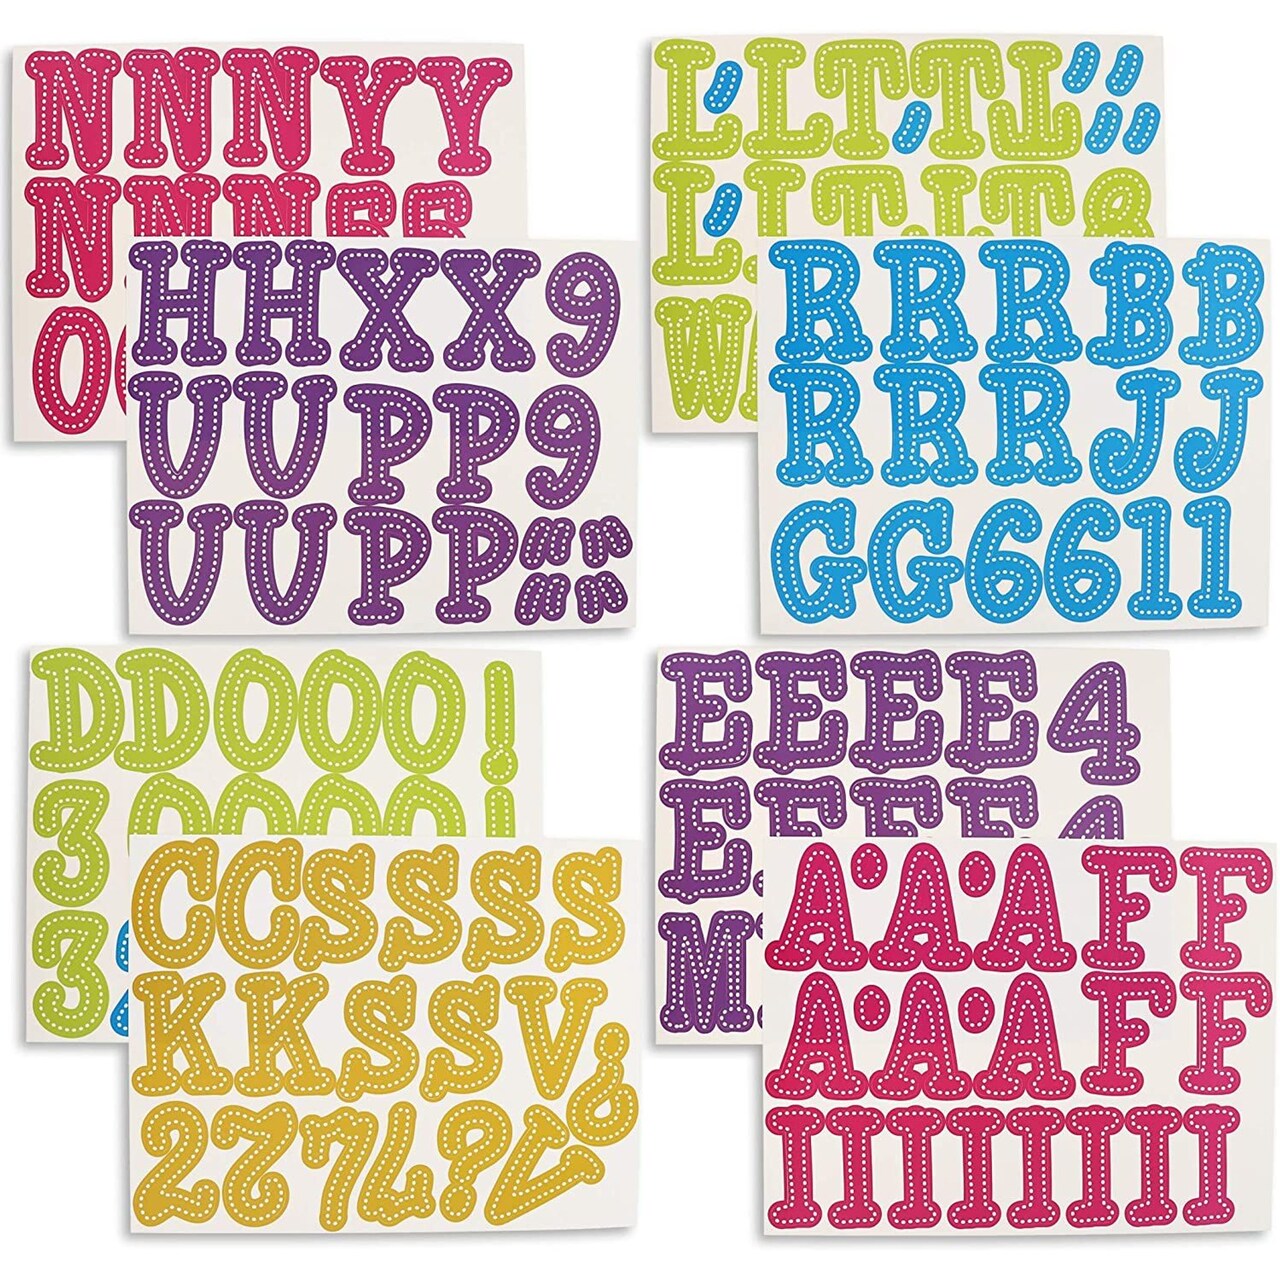 Alphabet Letters and Numbers Bulletin Board Cutouts (144 Count